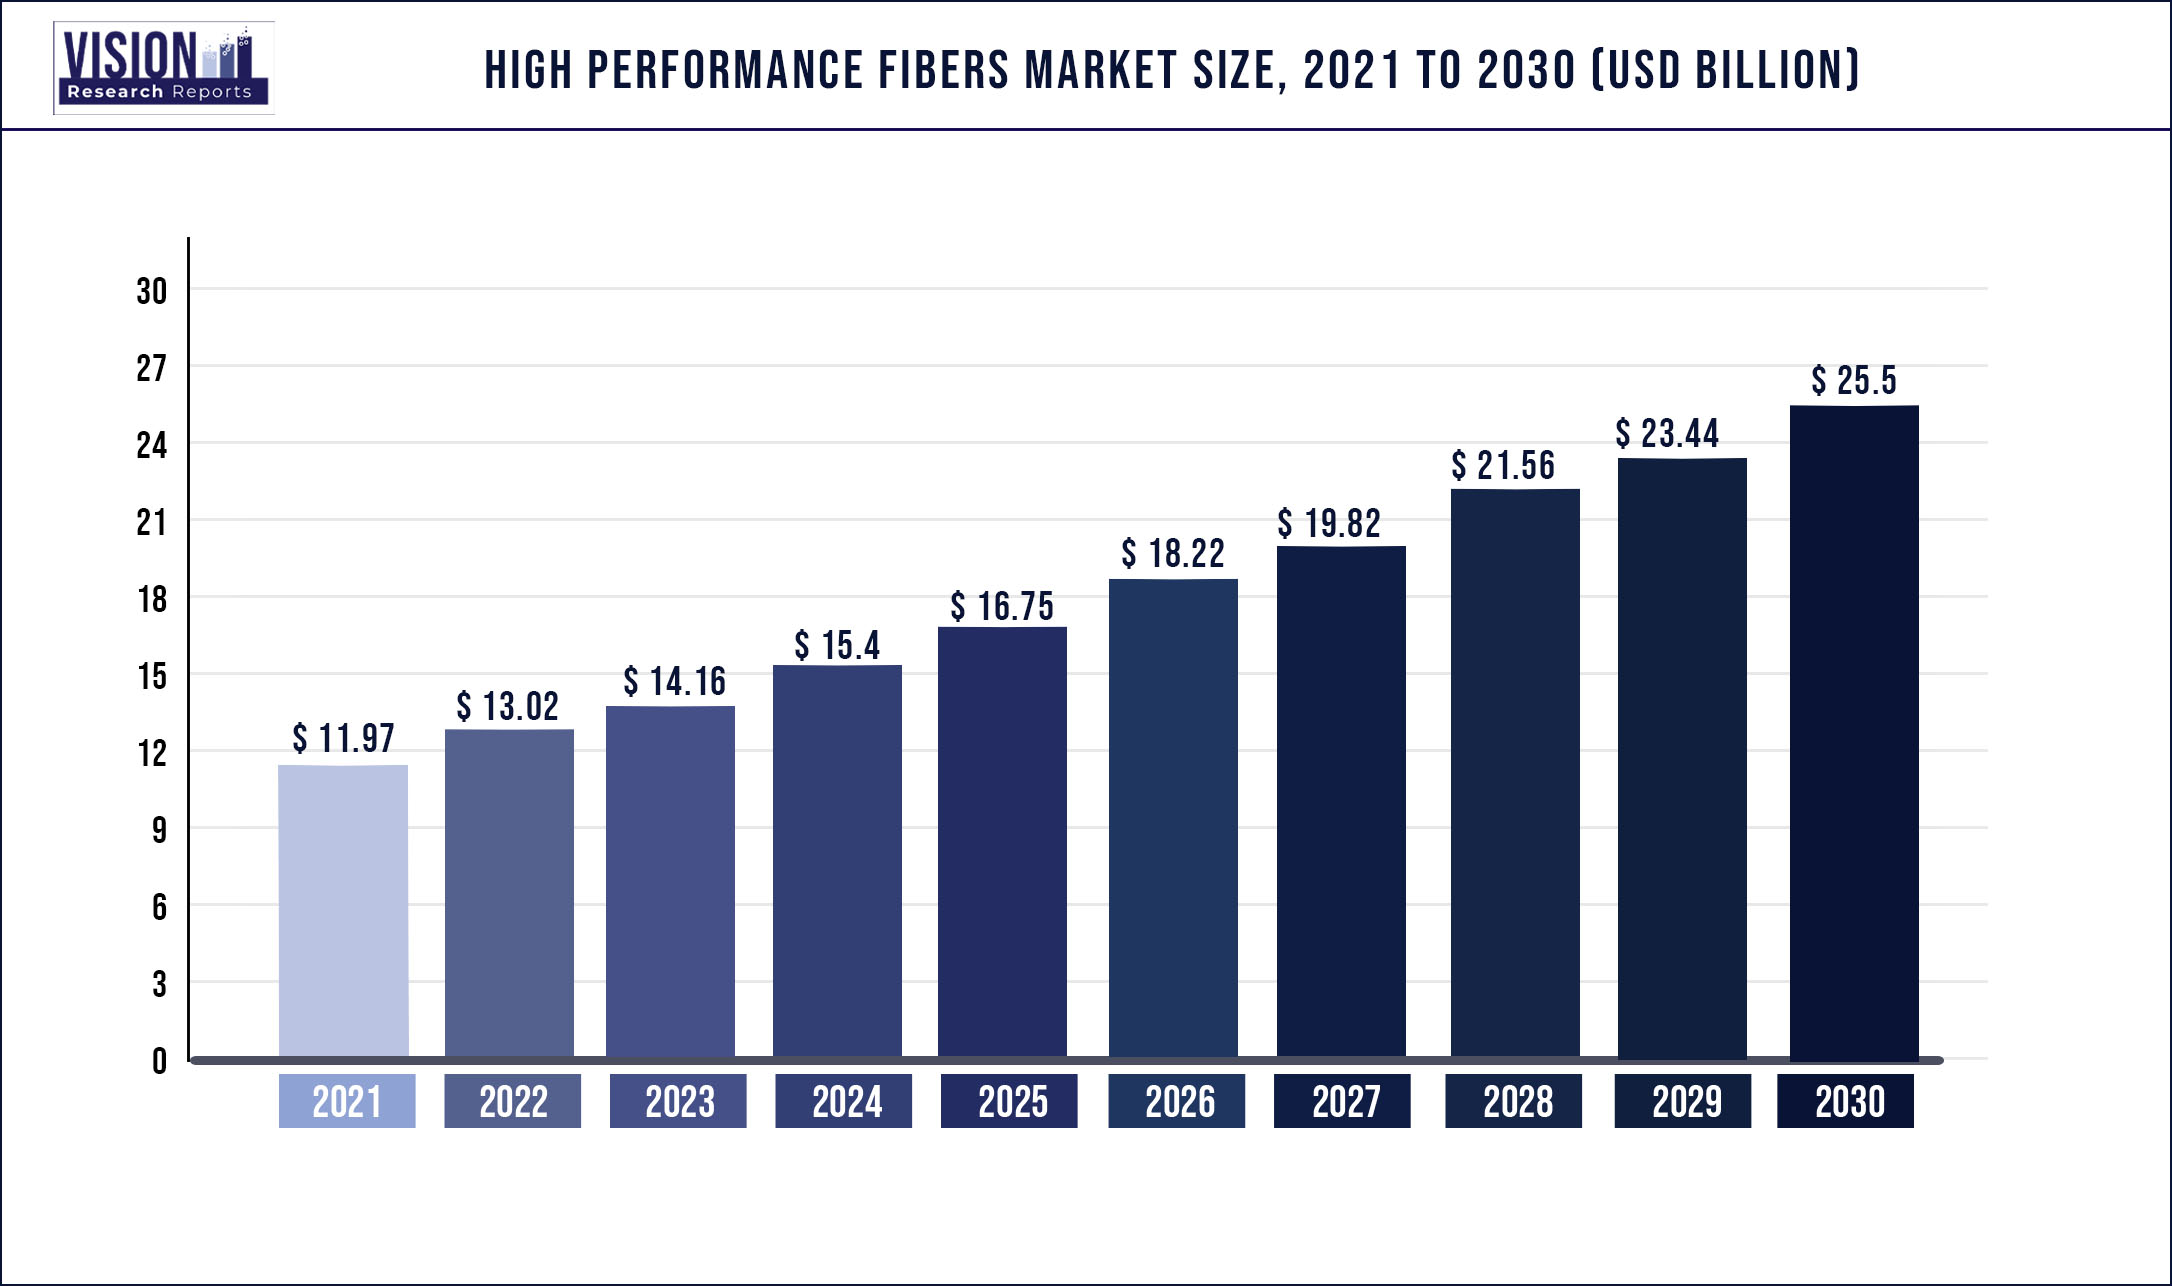 High Performance Fibers Market Size 2021 to 2030